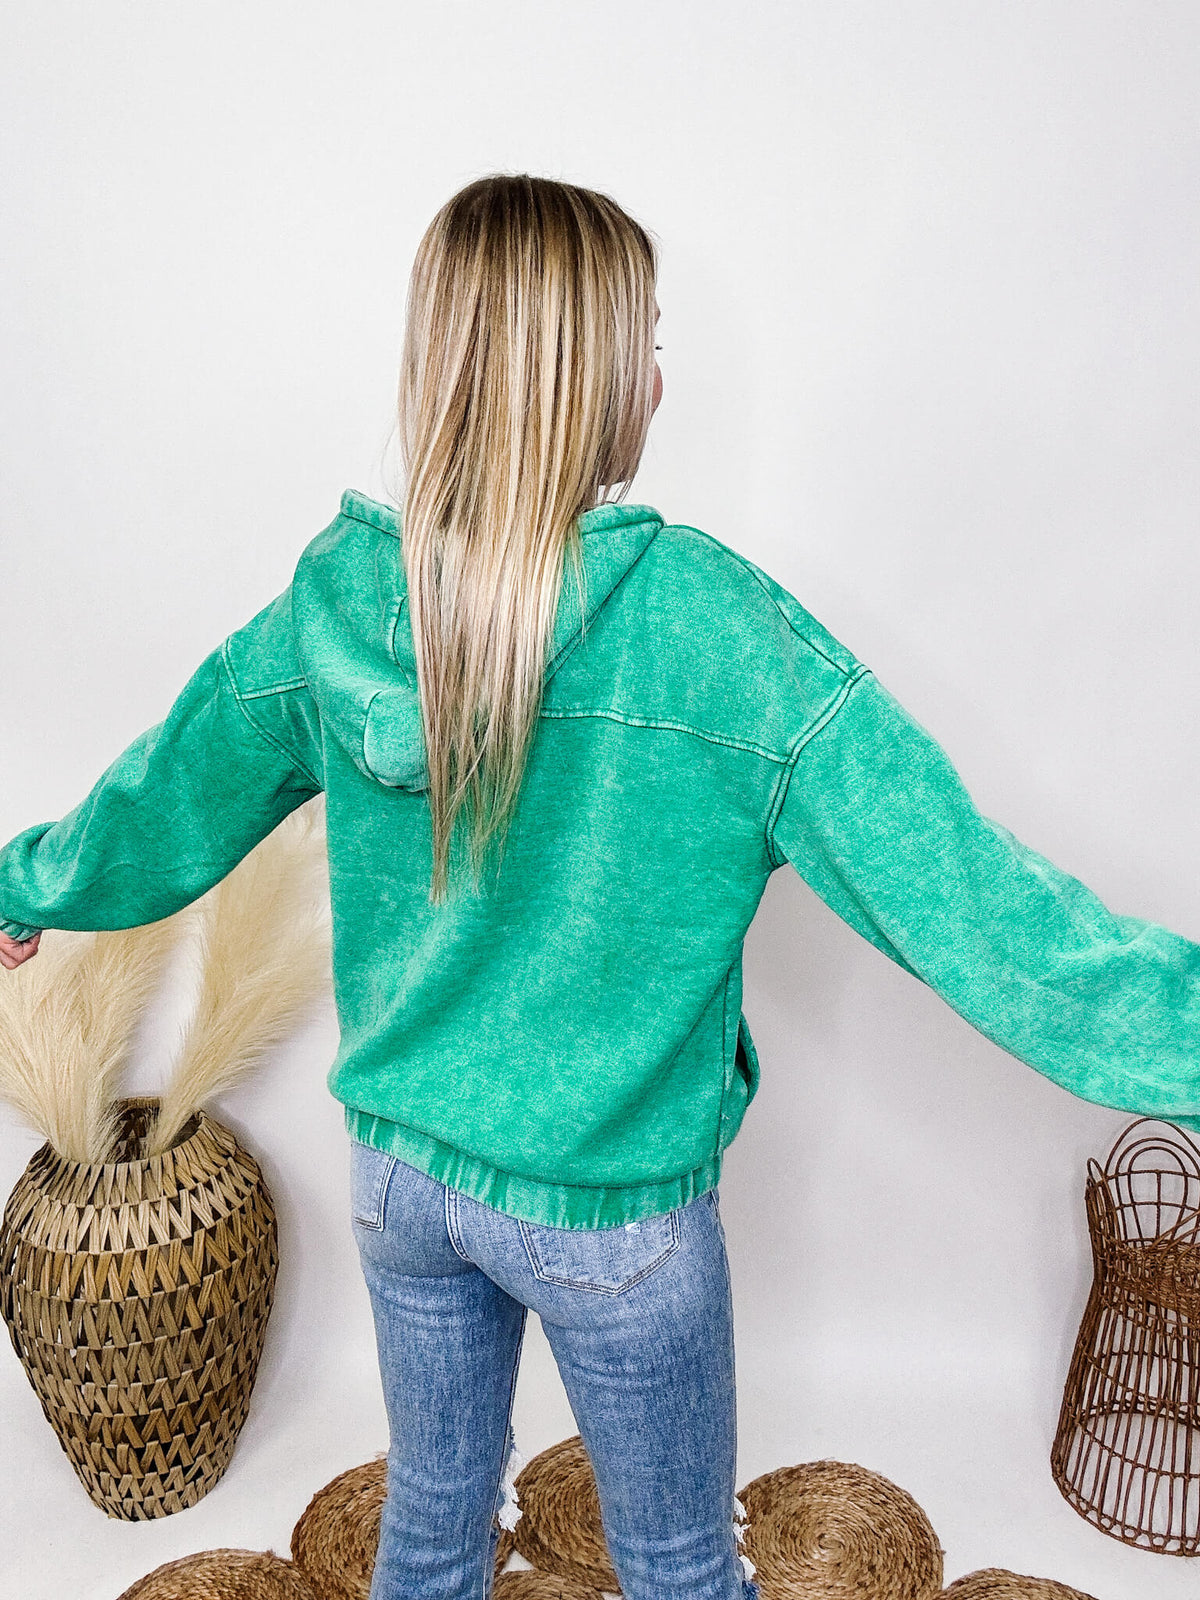 Zenana Kelly Green Acid Washed Half Button Up Hoodie Pullover Side Pockets Ribbed Elastic Cuff and Hem Details Oversized Fit 58% Cotton, 37% Polyester, 5% Spandex